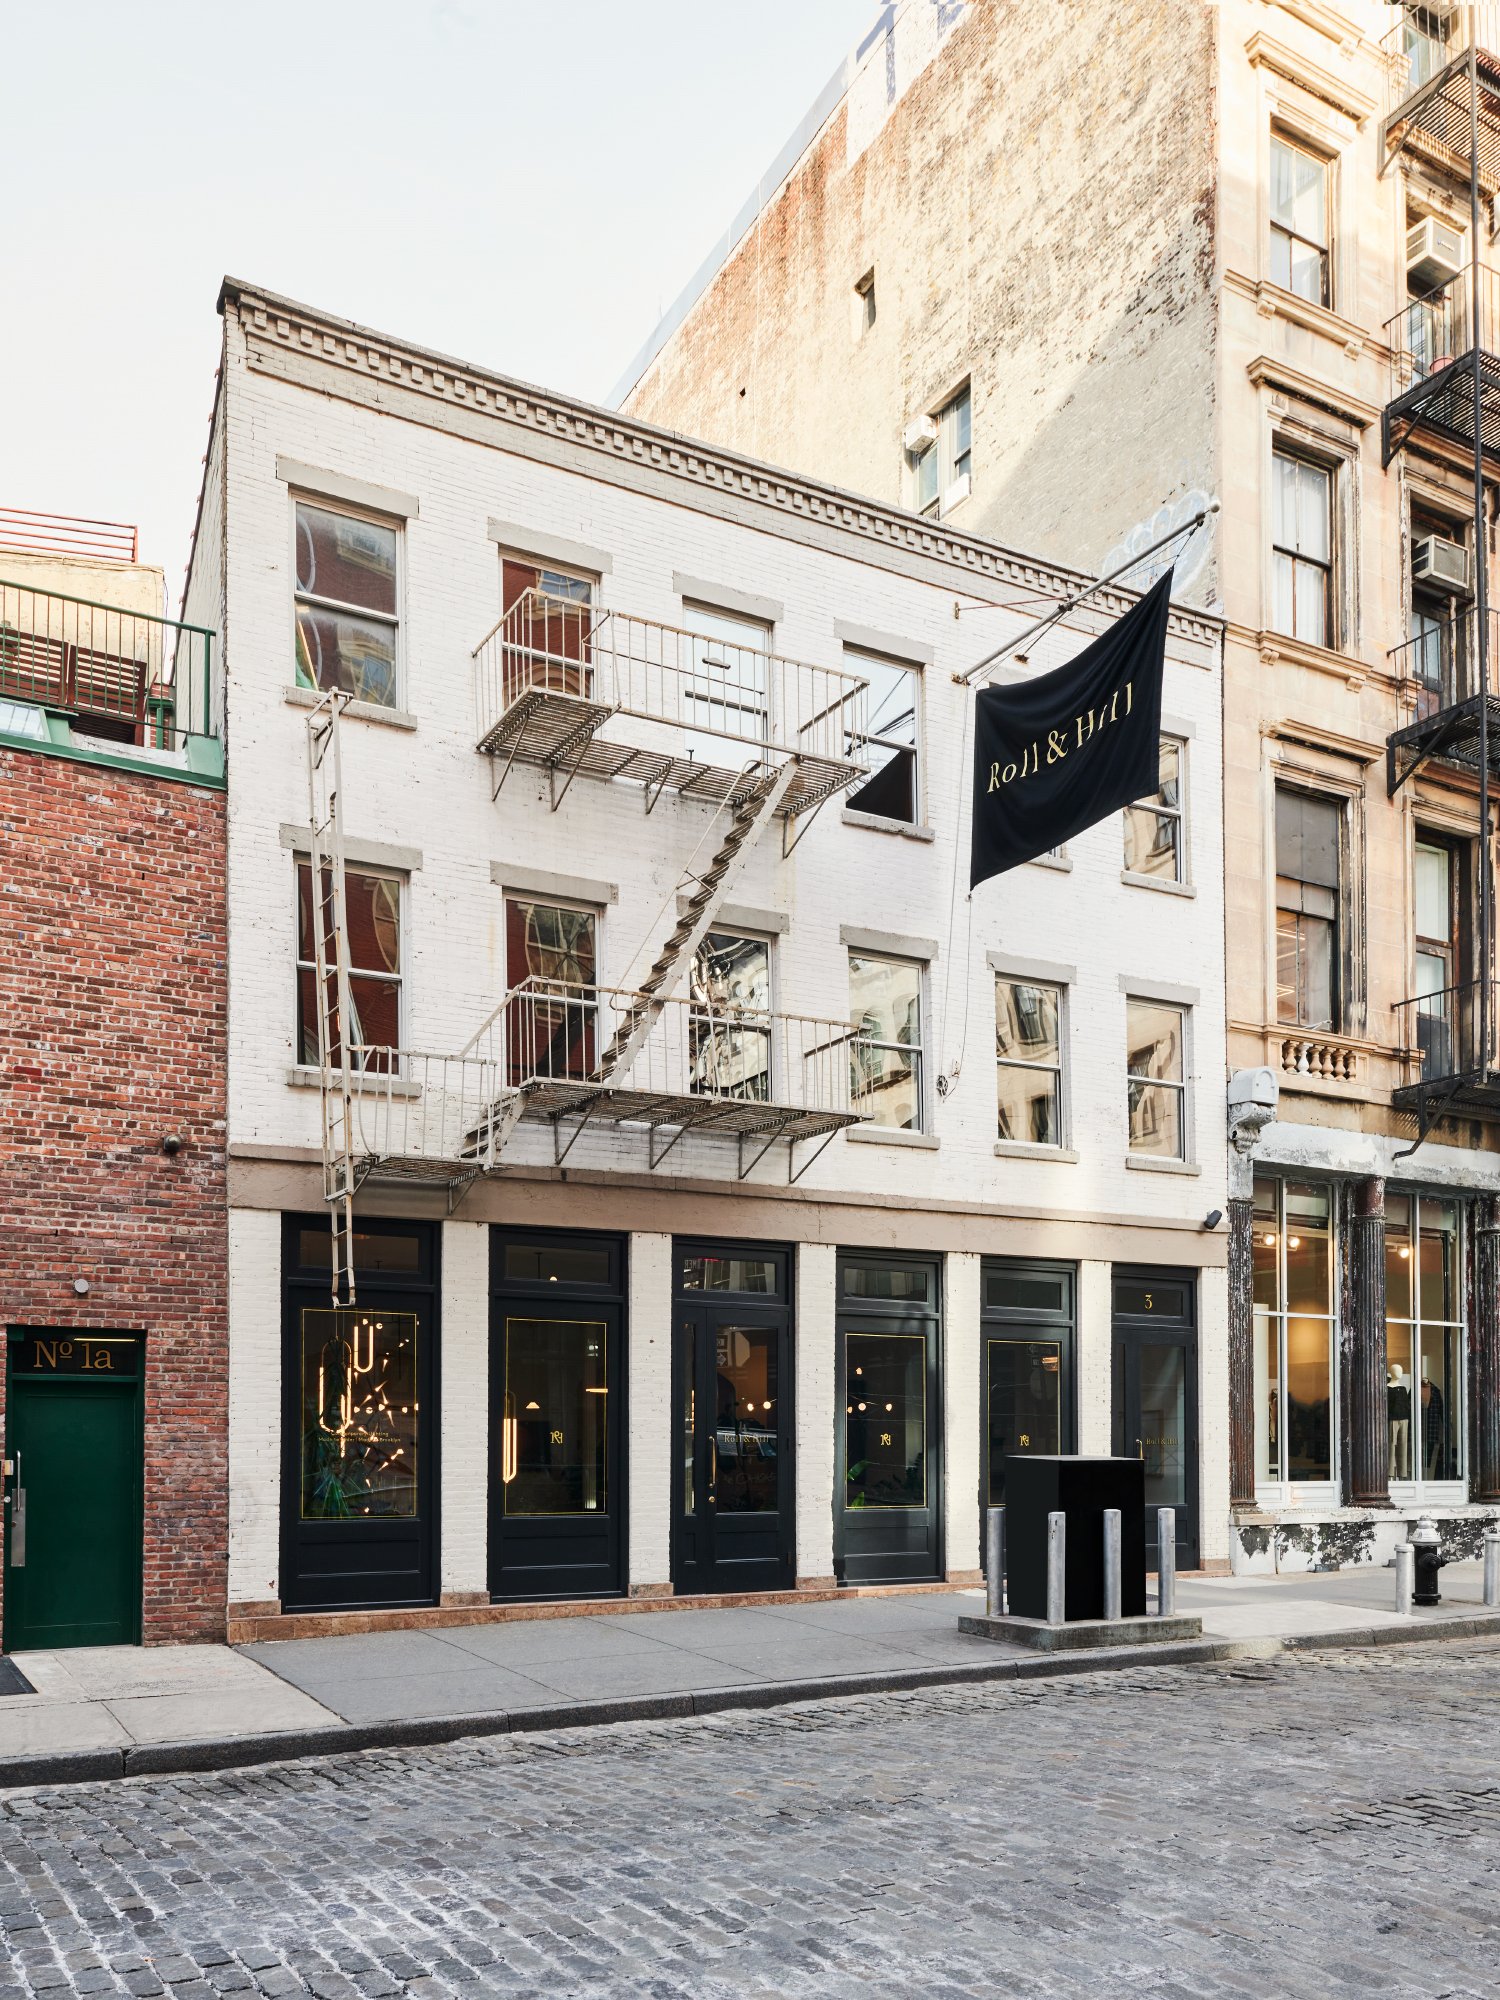 Roll & Hill's New York showroom is open again, along with their factory where work continues making lights for their international clients. Photo c/o Roll & Hill. 